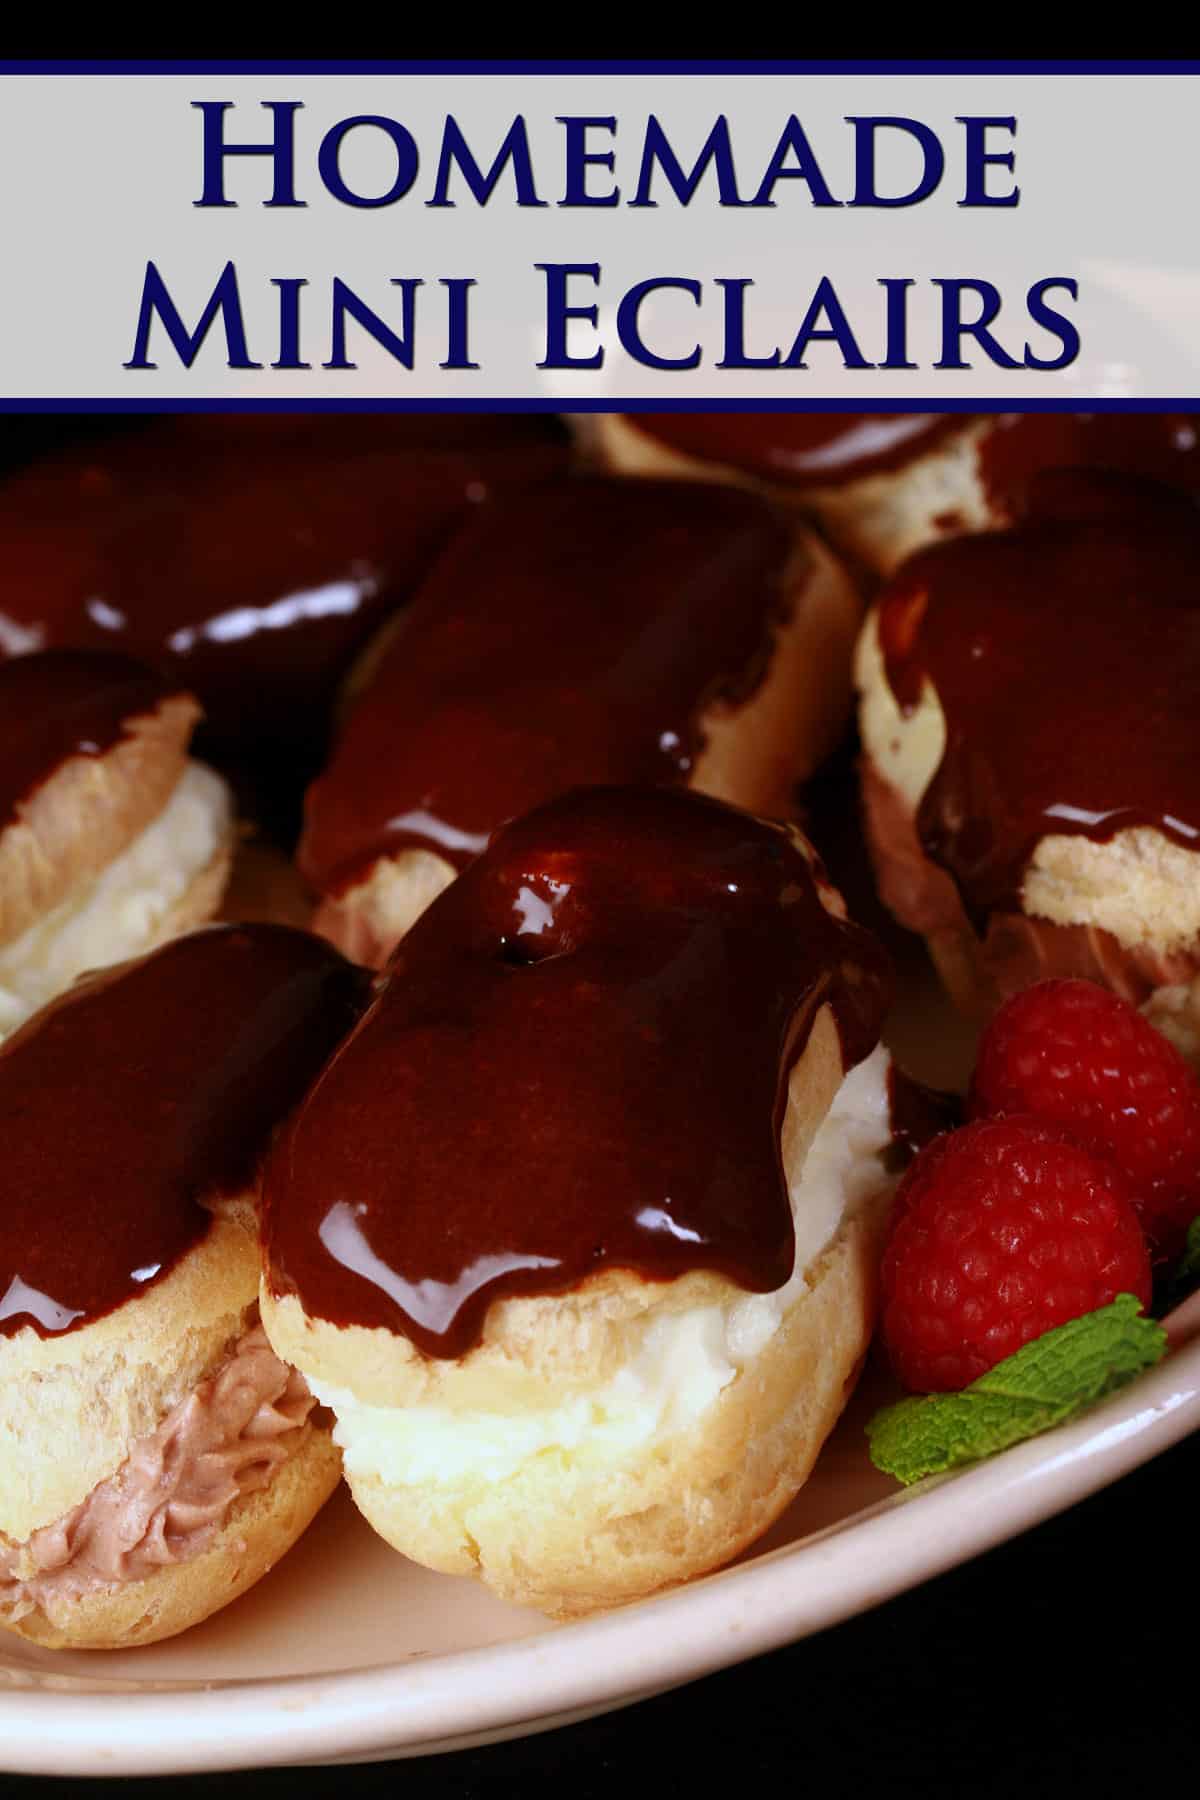 A plate of mini eclairs with chocolate and vanilla fillings and chocolate glaze.